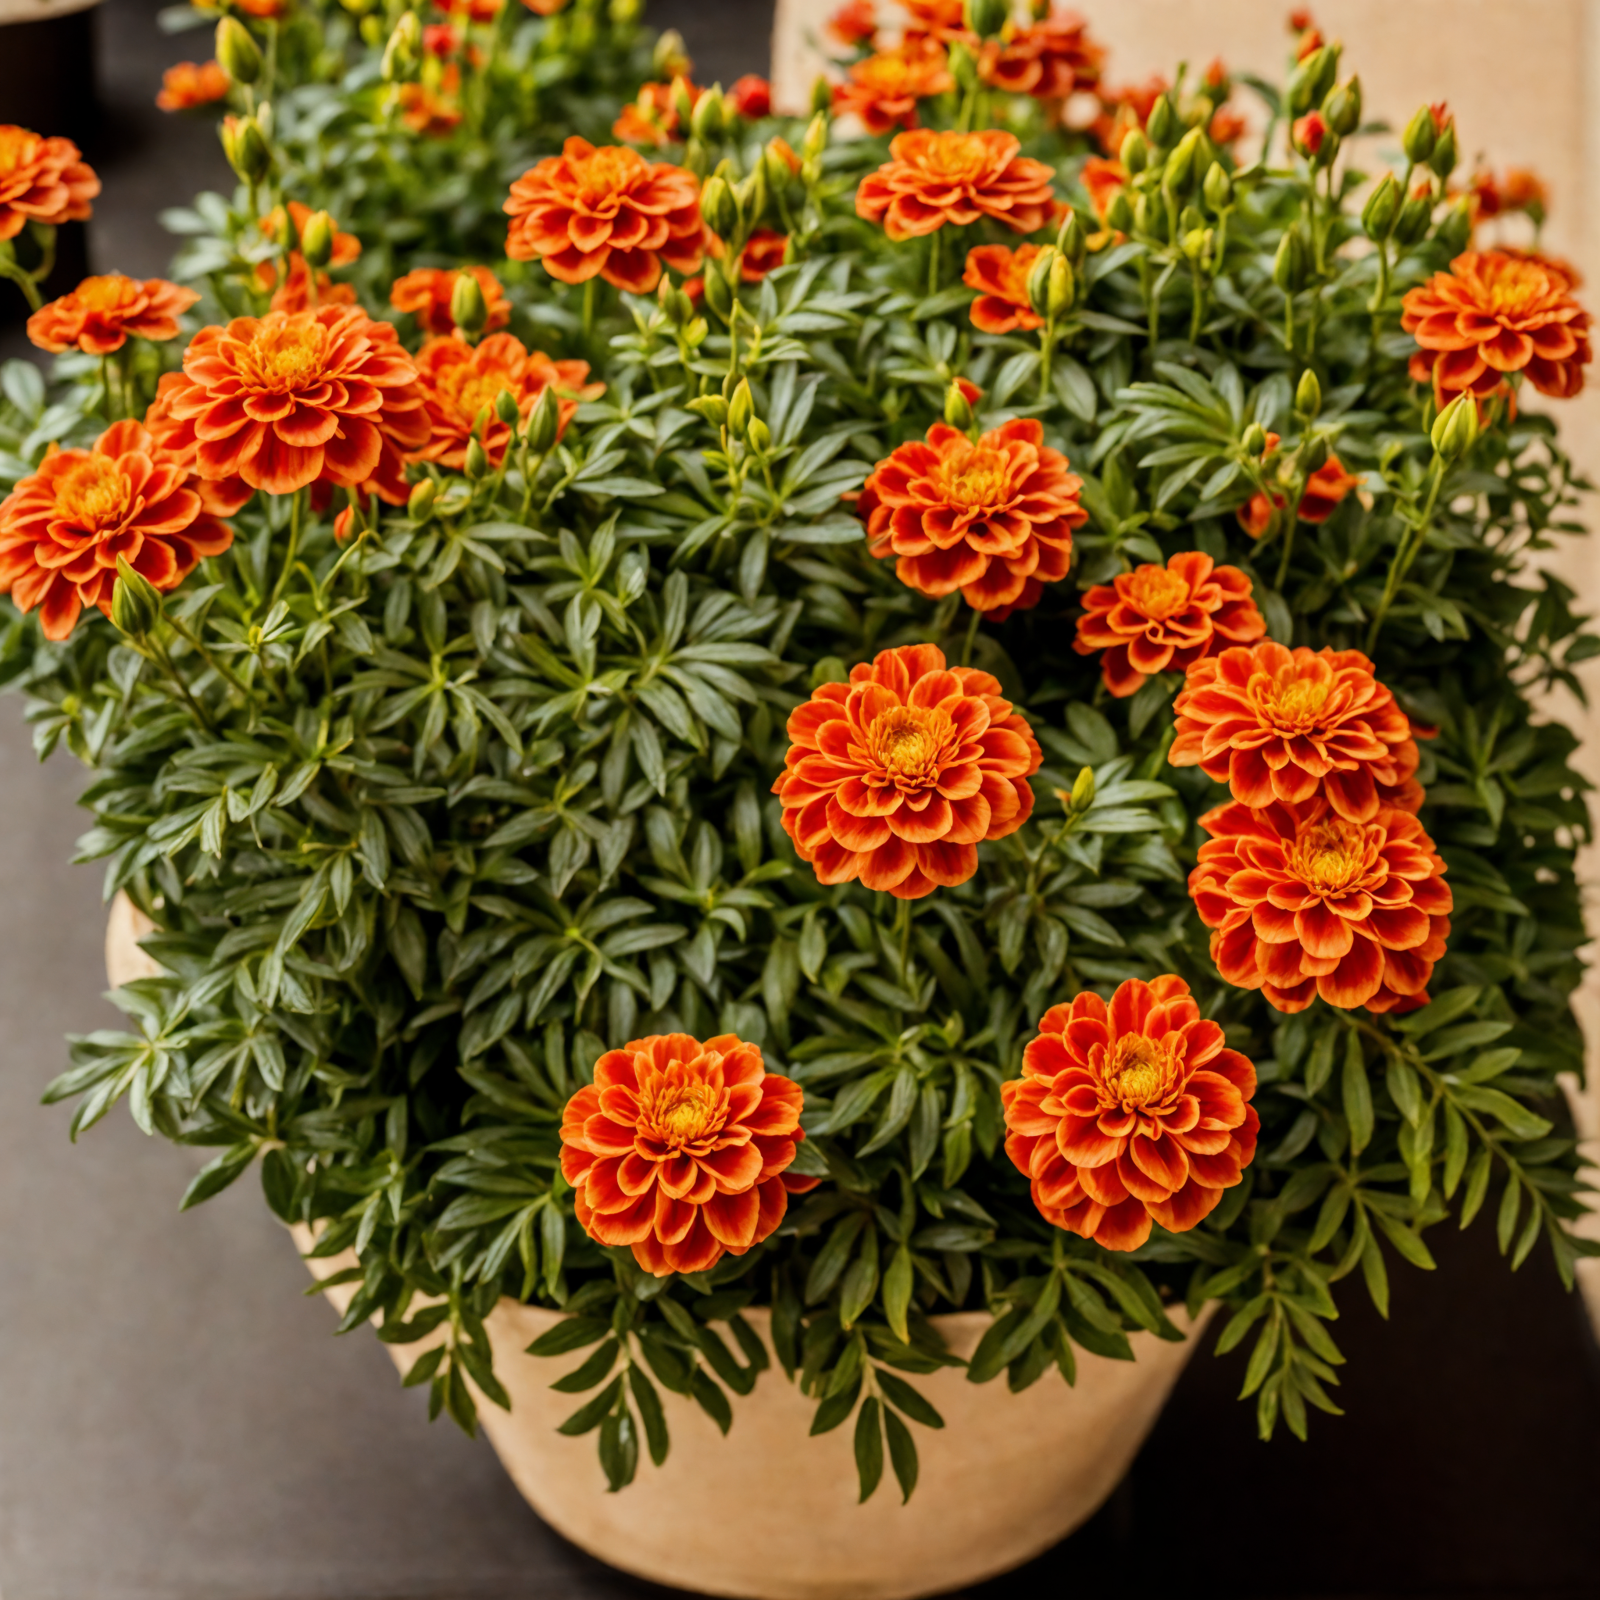 Vibrant orange Tagetes erecta flowers in a brown planter, with clear lighting and a dark background.